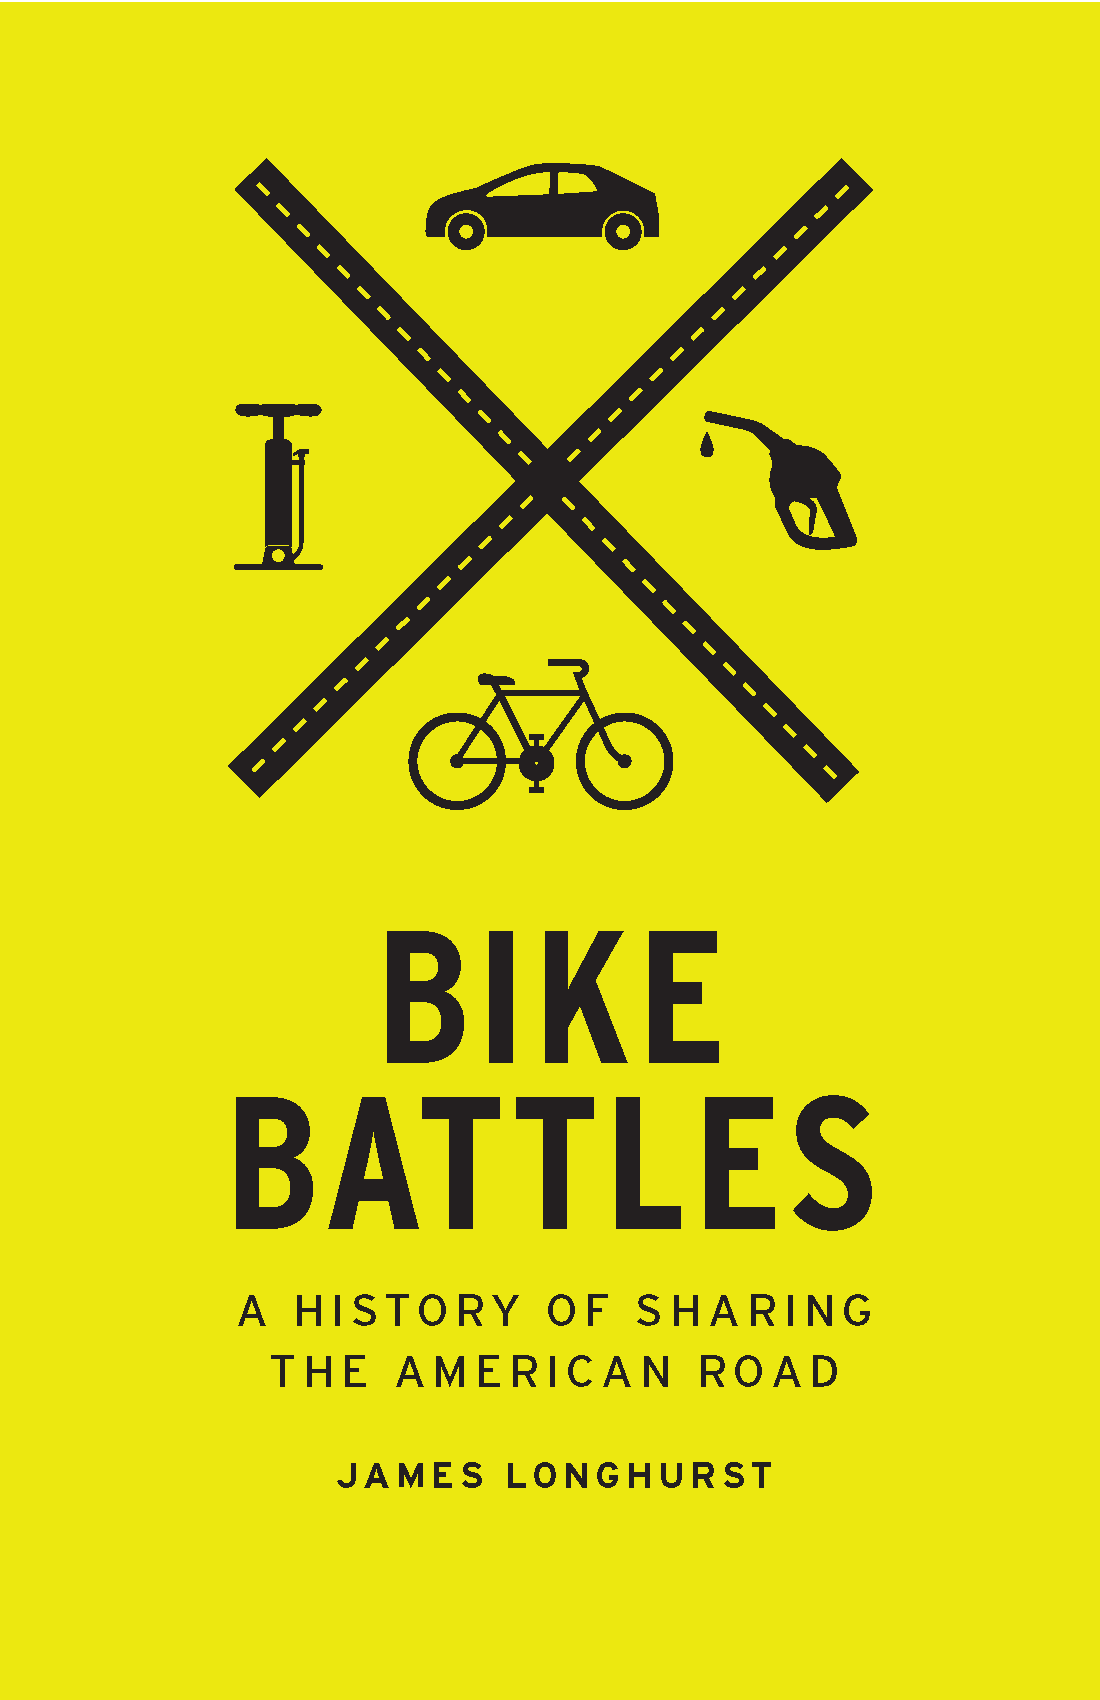 The road as a commons: An interview with James Longhurst, author of "Bike Battles" (2015)